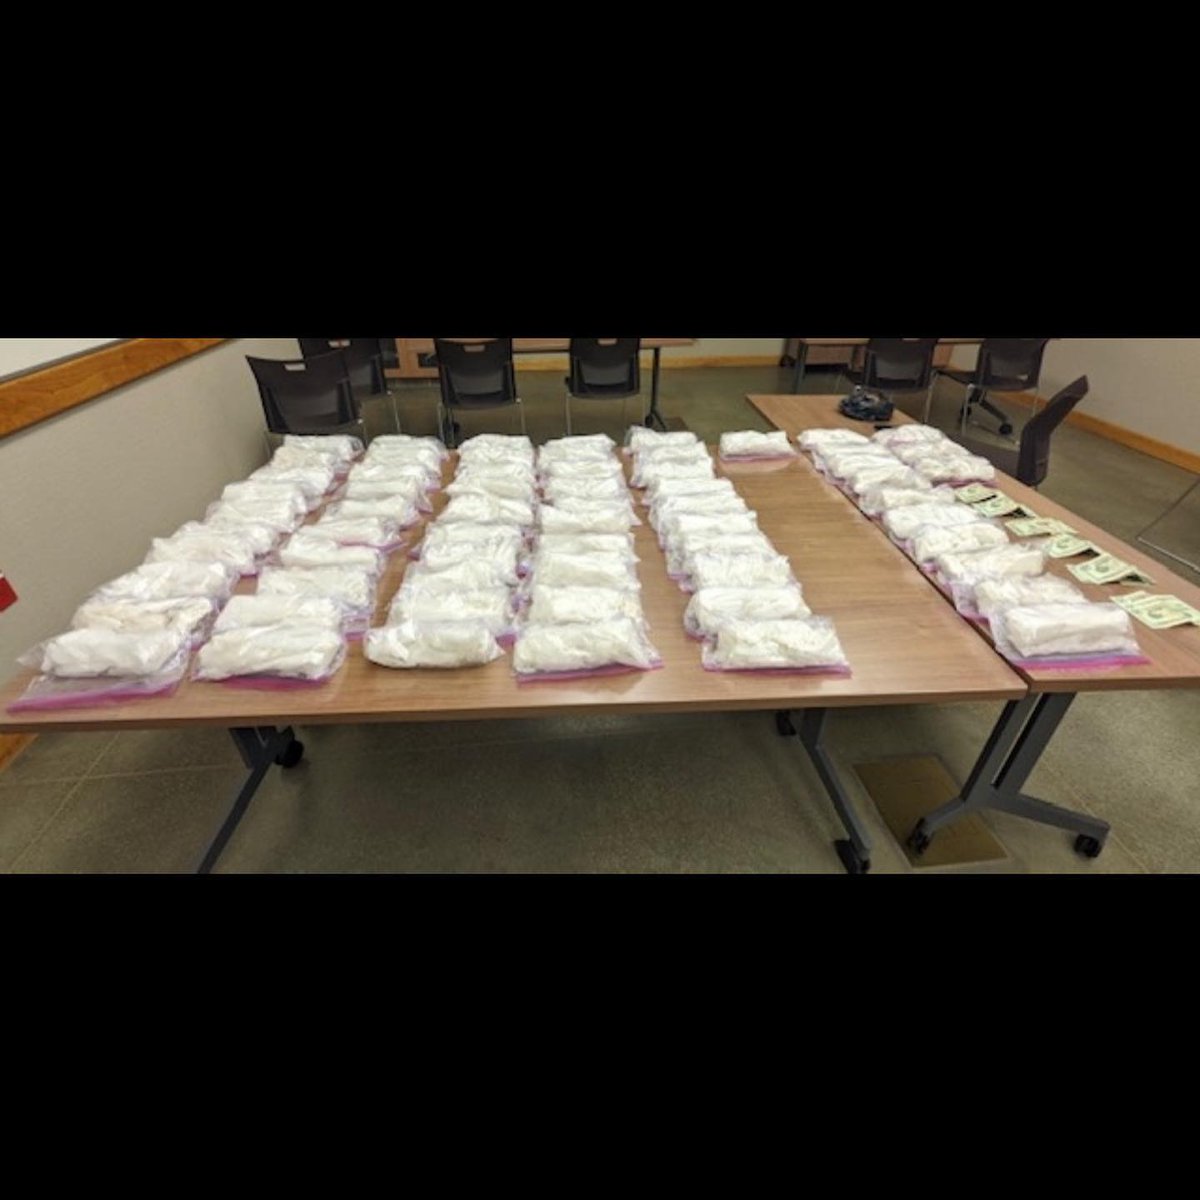 Two men have been arrested after police seized over $1M worth of suspected meth in Delano.